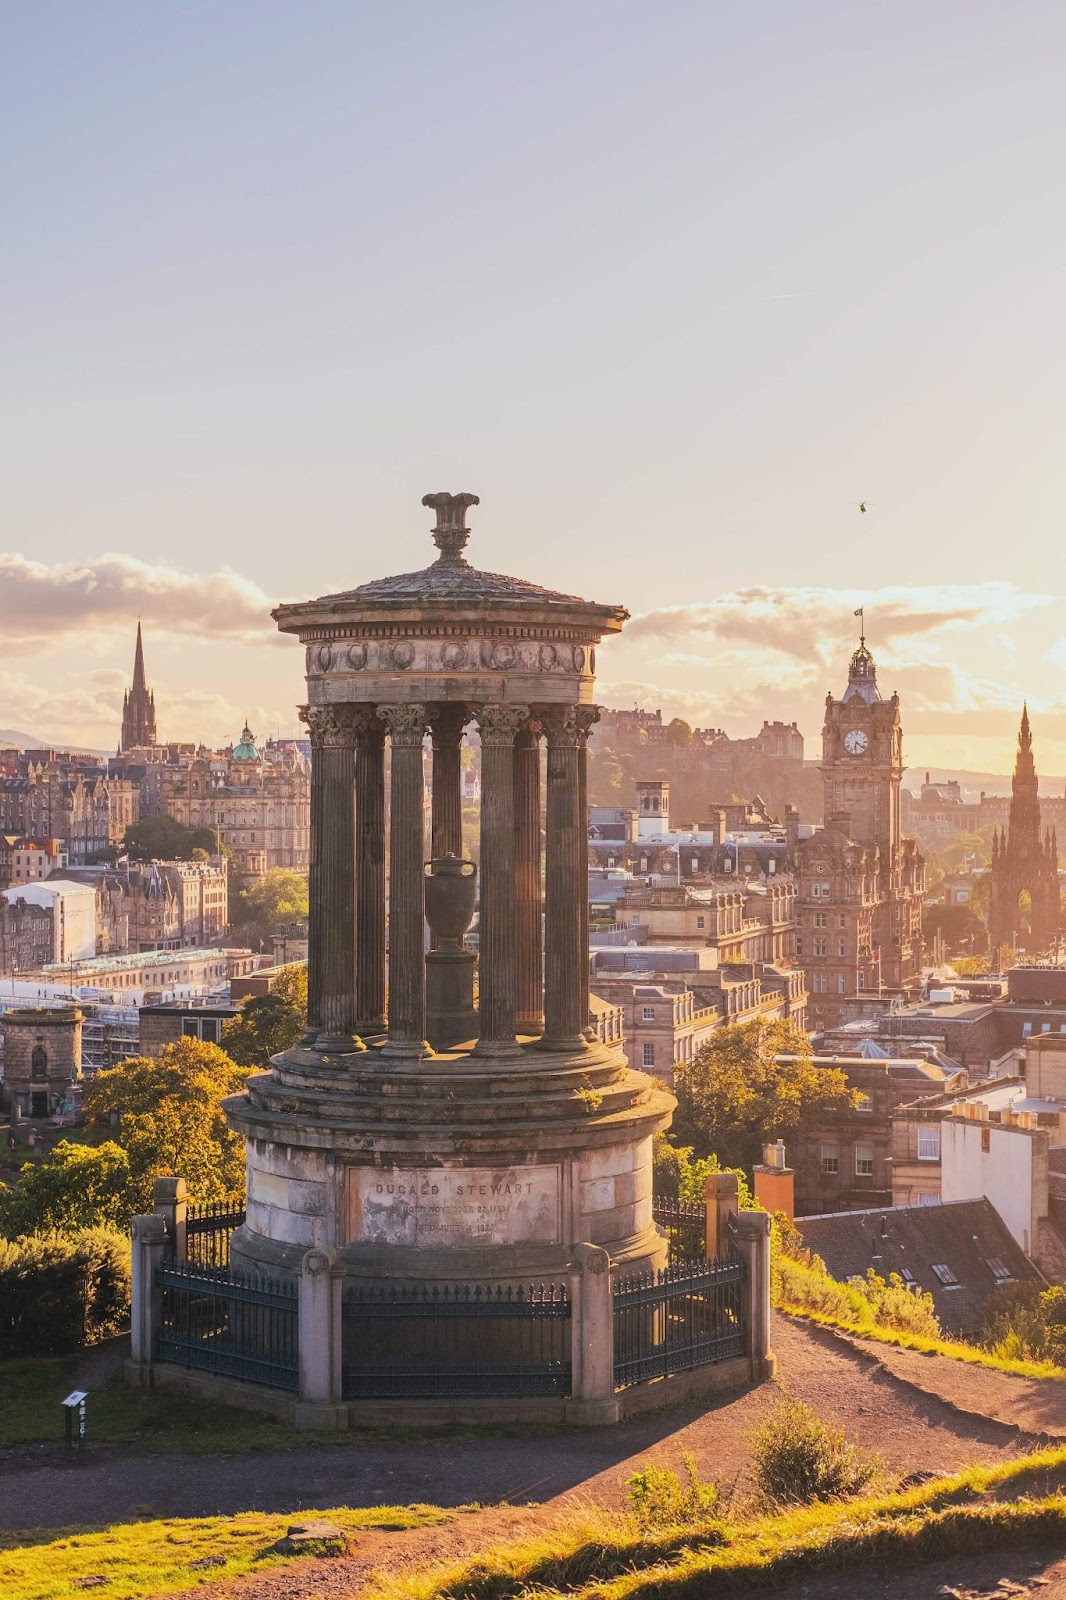 24 hours in Edinburgh. This is an image of the Dugald Stewart Monument at Carlton Hill in Edinburgh.